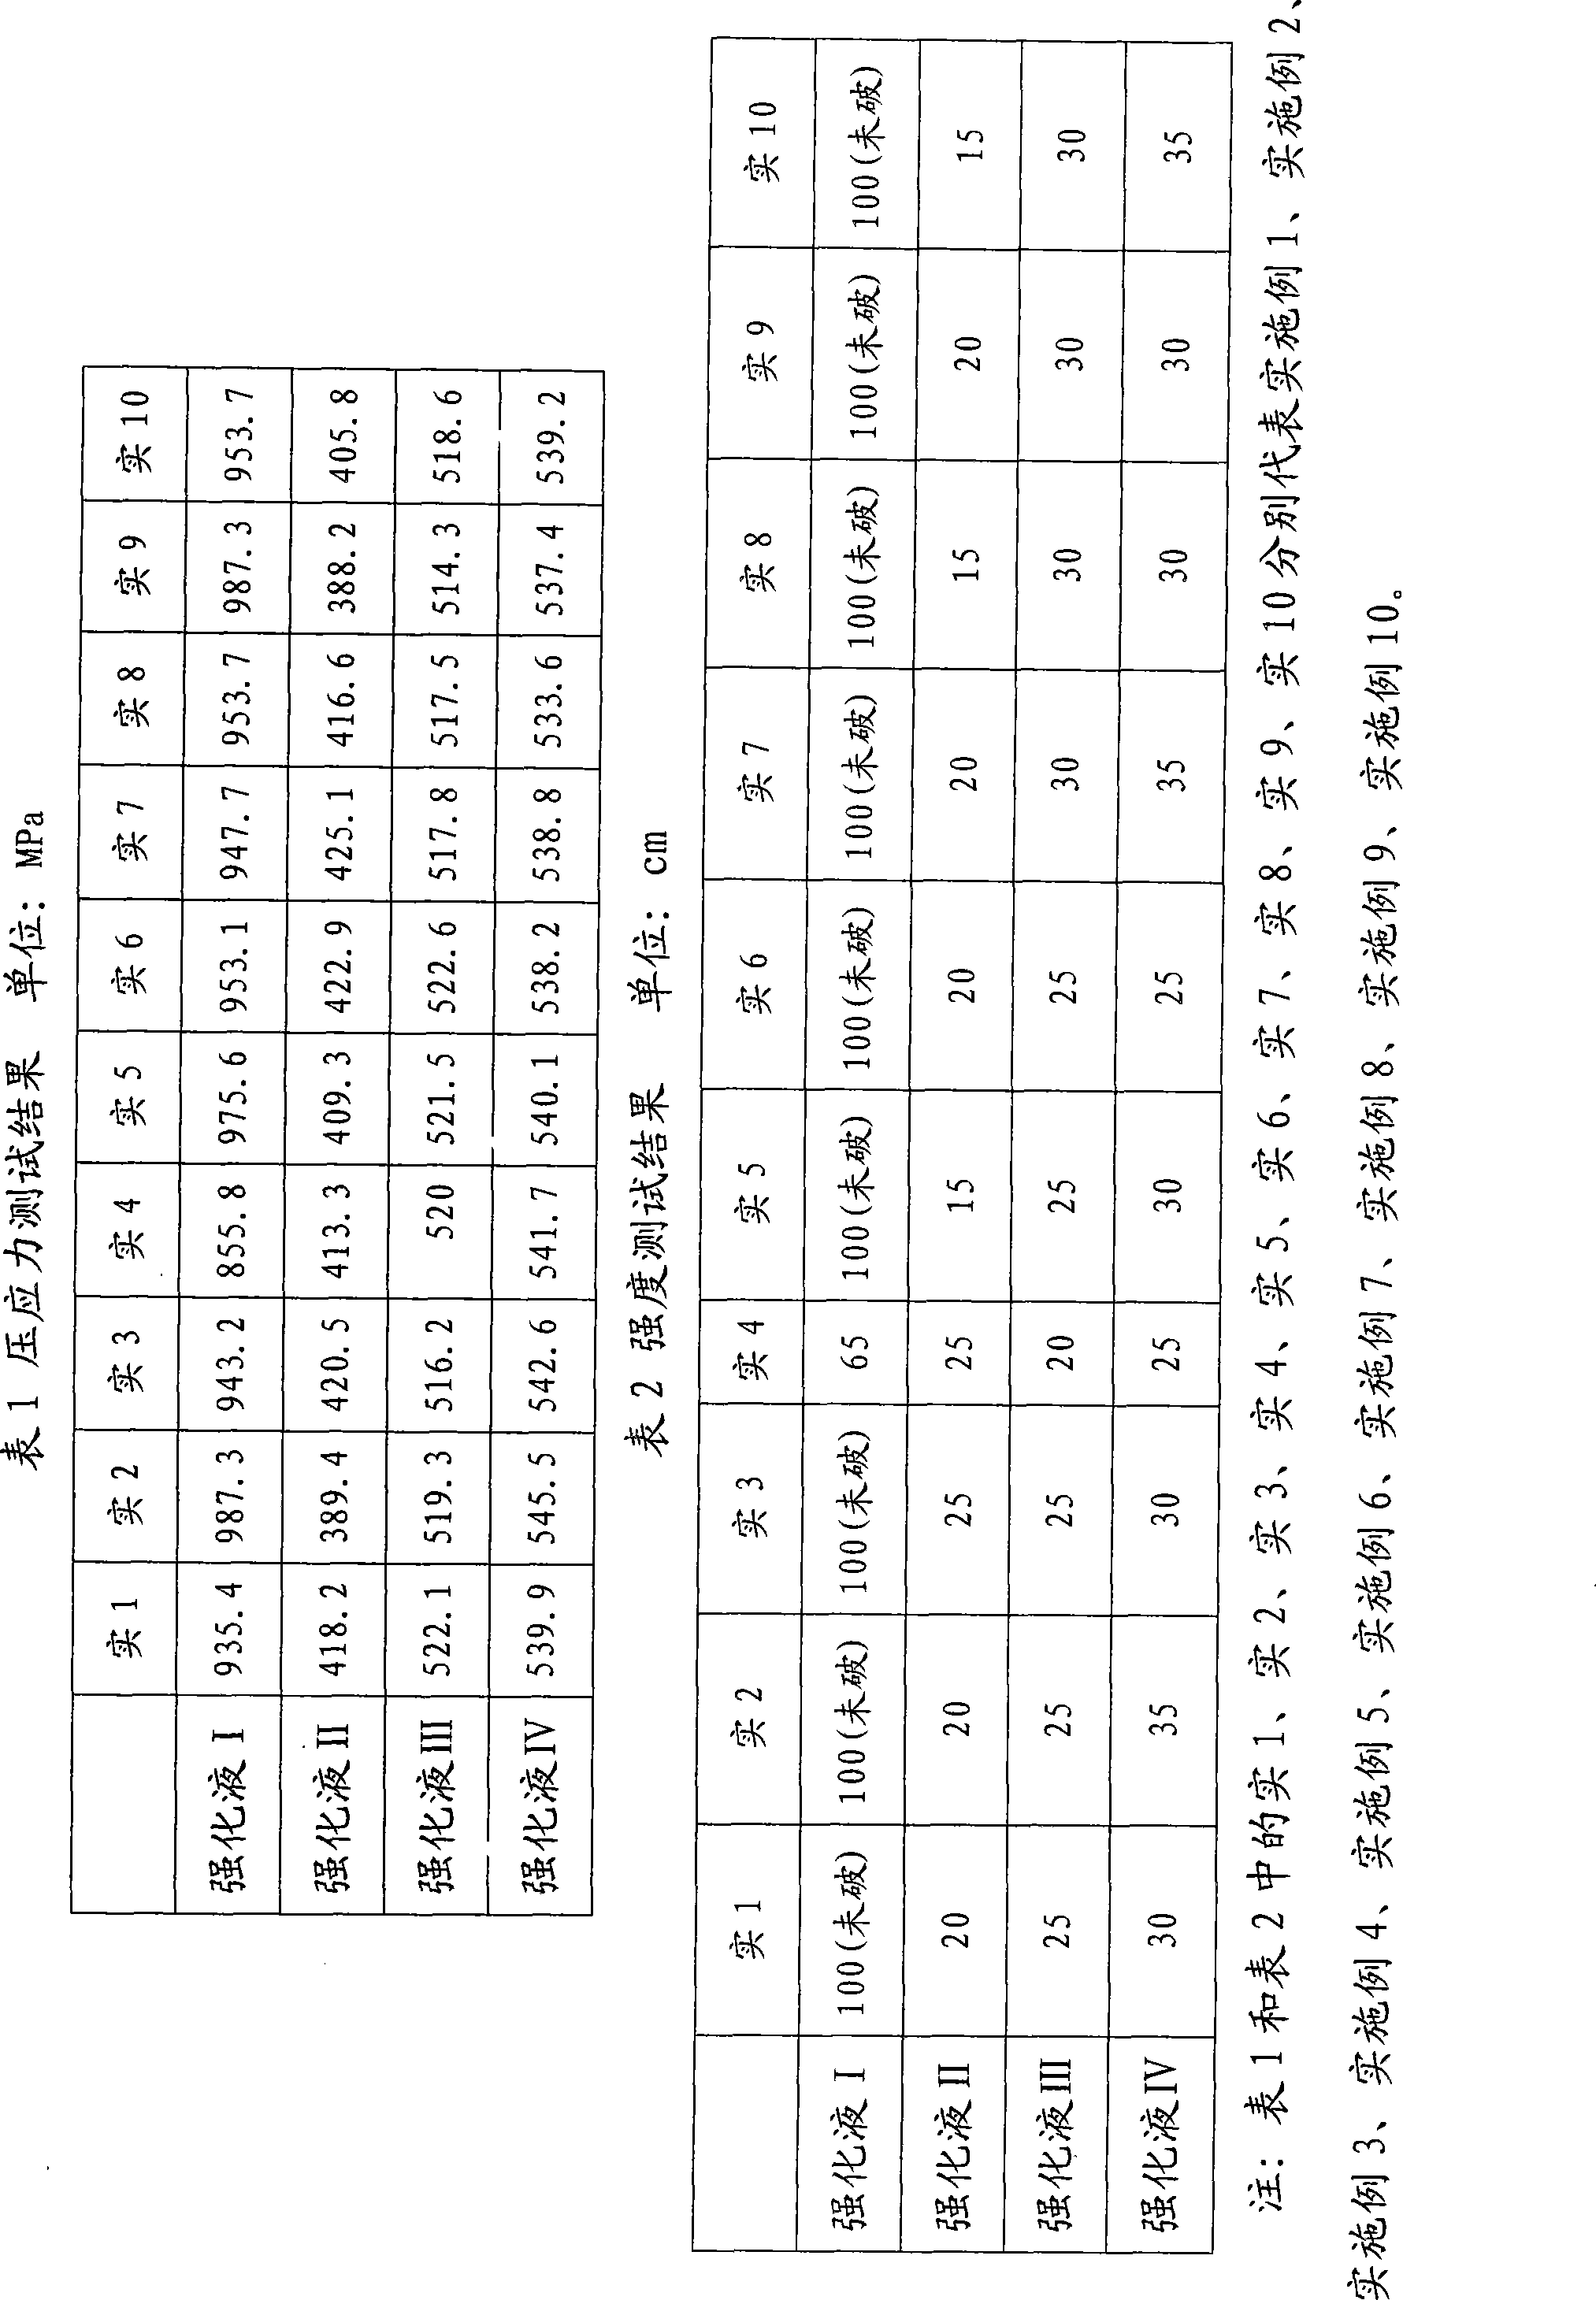 Catalyst for chemically enhancing glass, preparation and use thereof